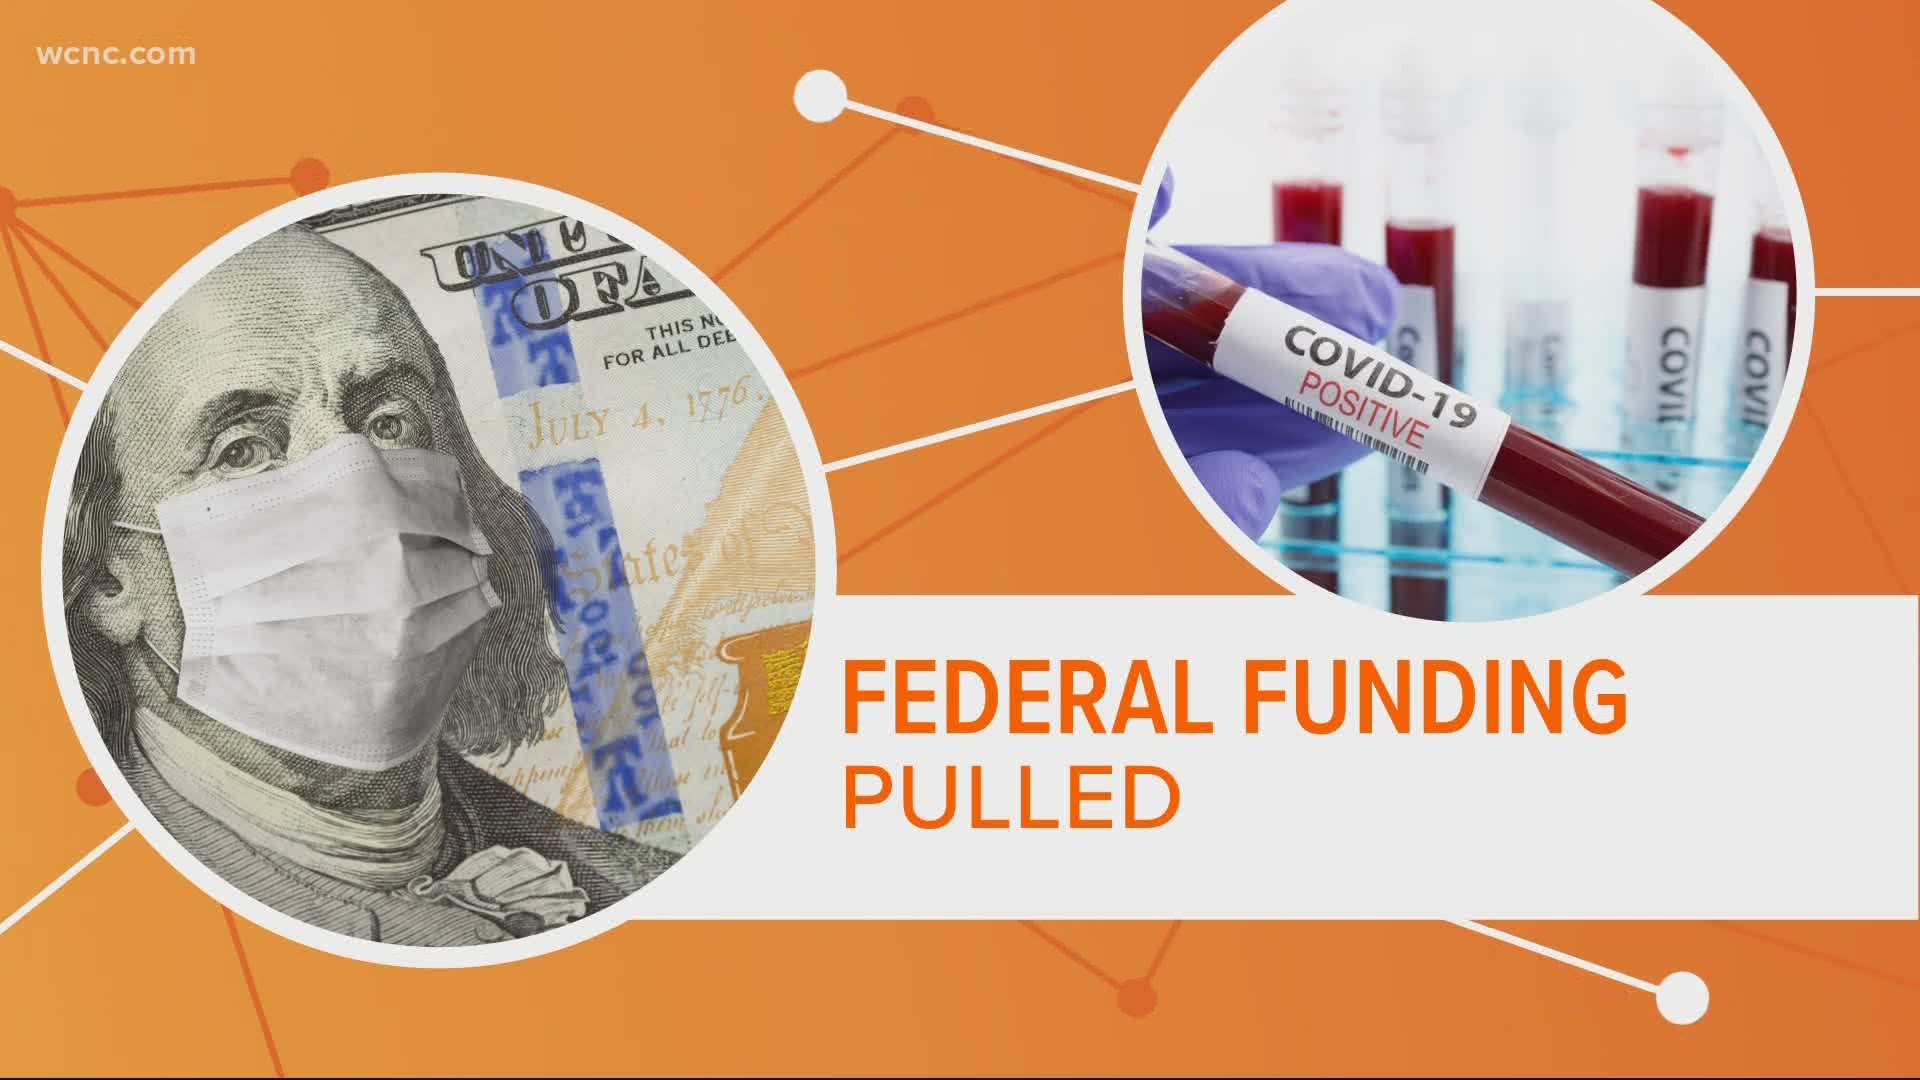 The federal government announced a controversial decision to pull funding from more than a dozen COVID-19 testing sites. Leaders say it could have lasting impacts.